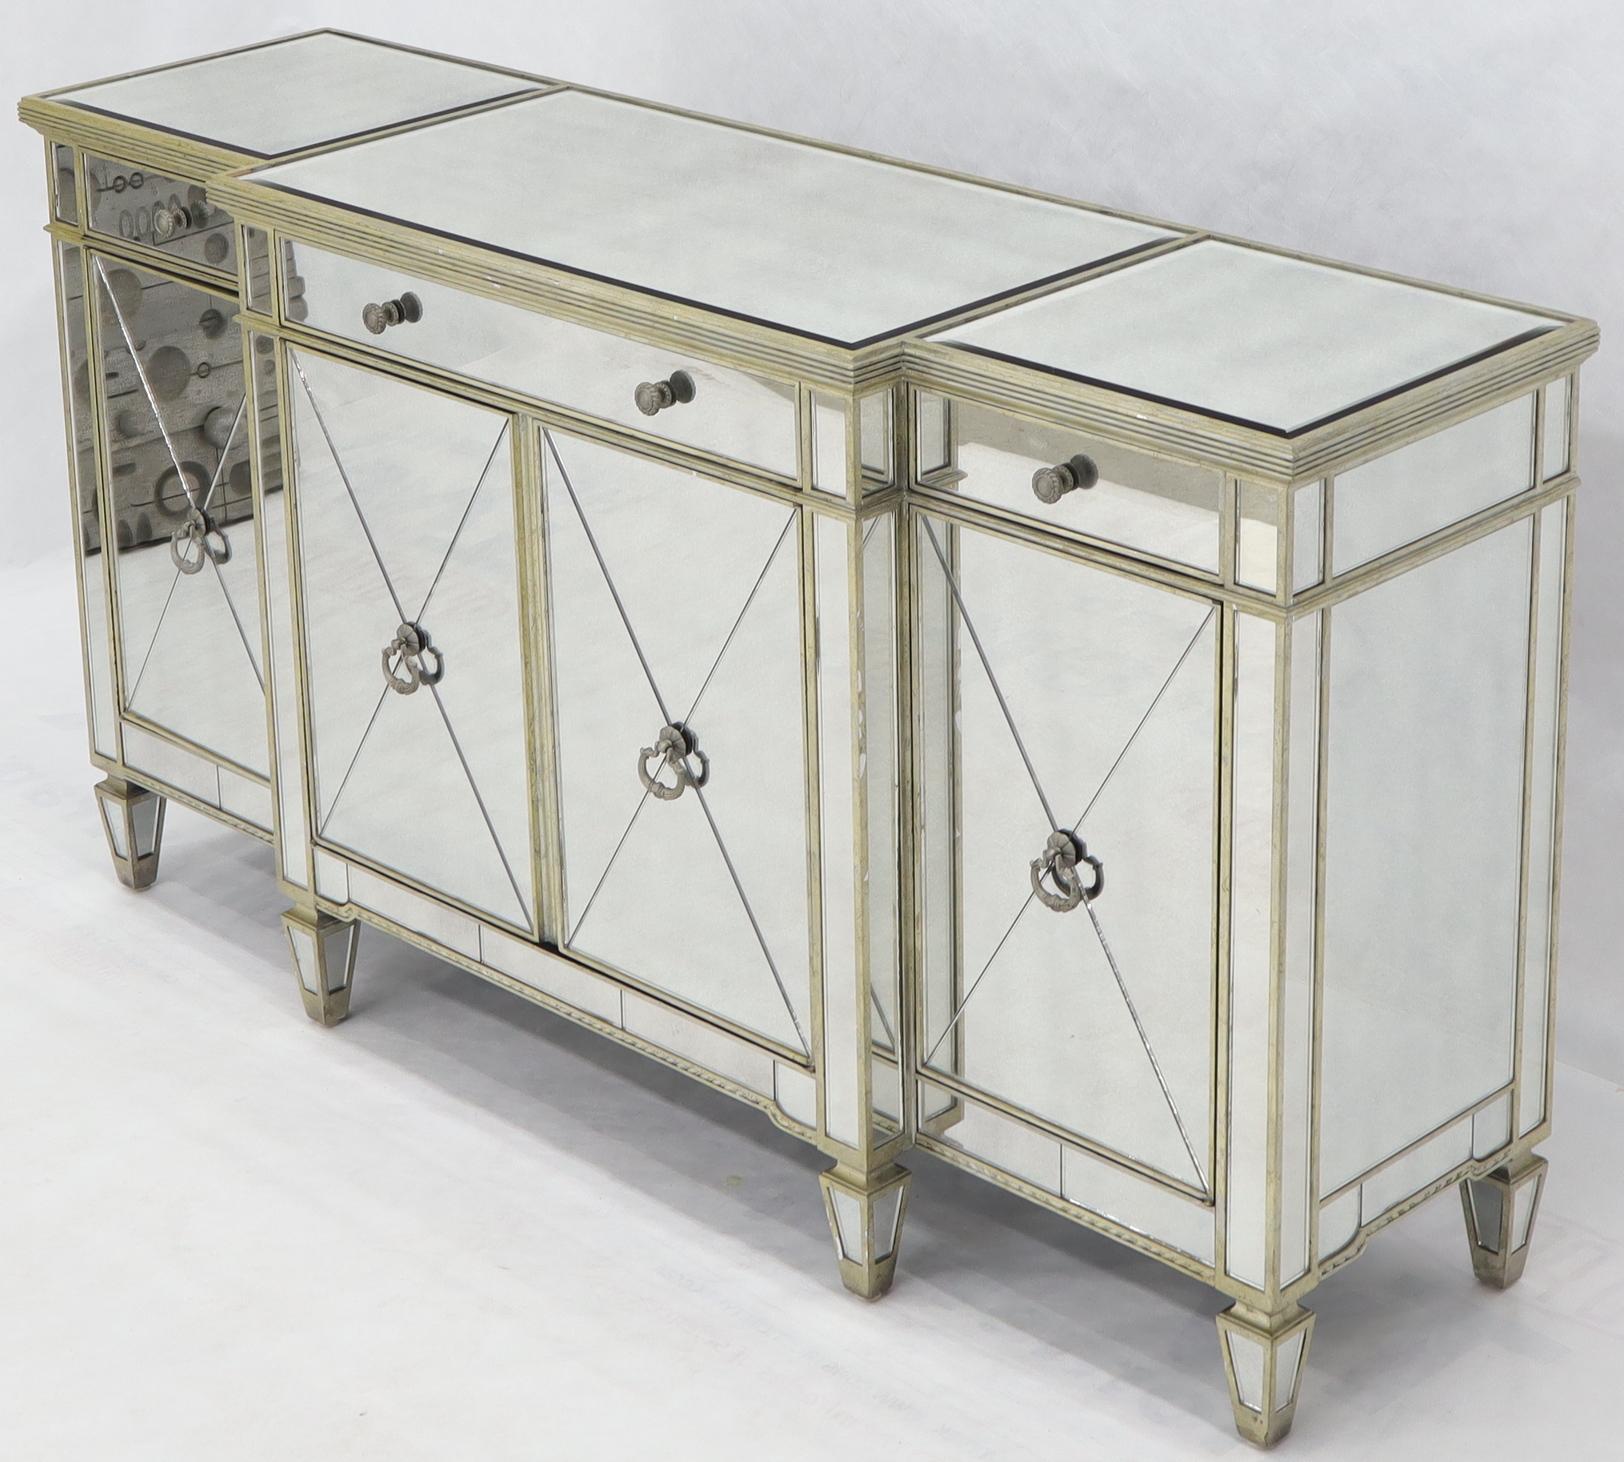 Modern 4 doors mirrored console credenza sideboard with built in wine rack bar.